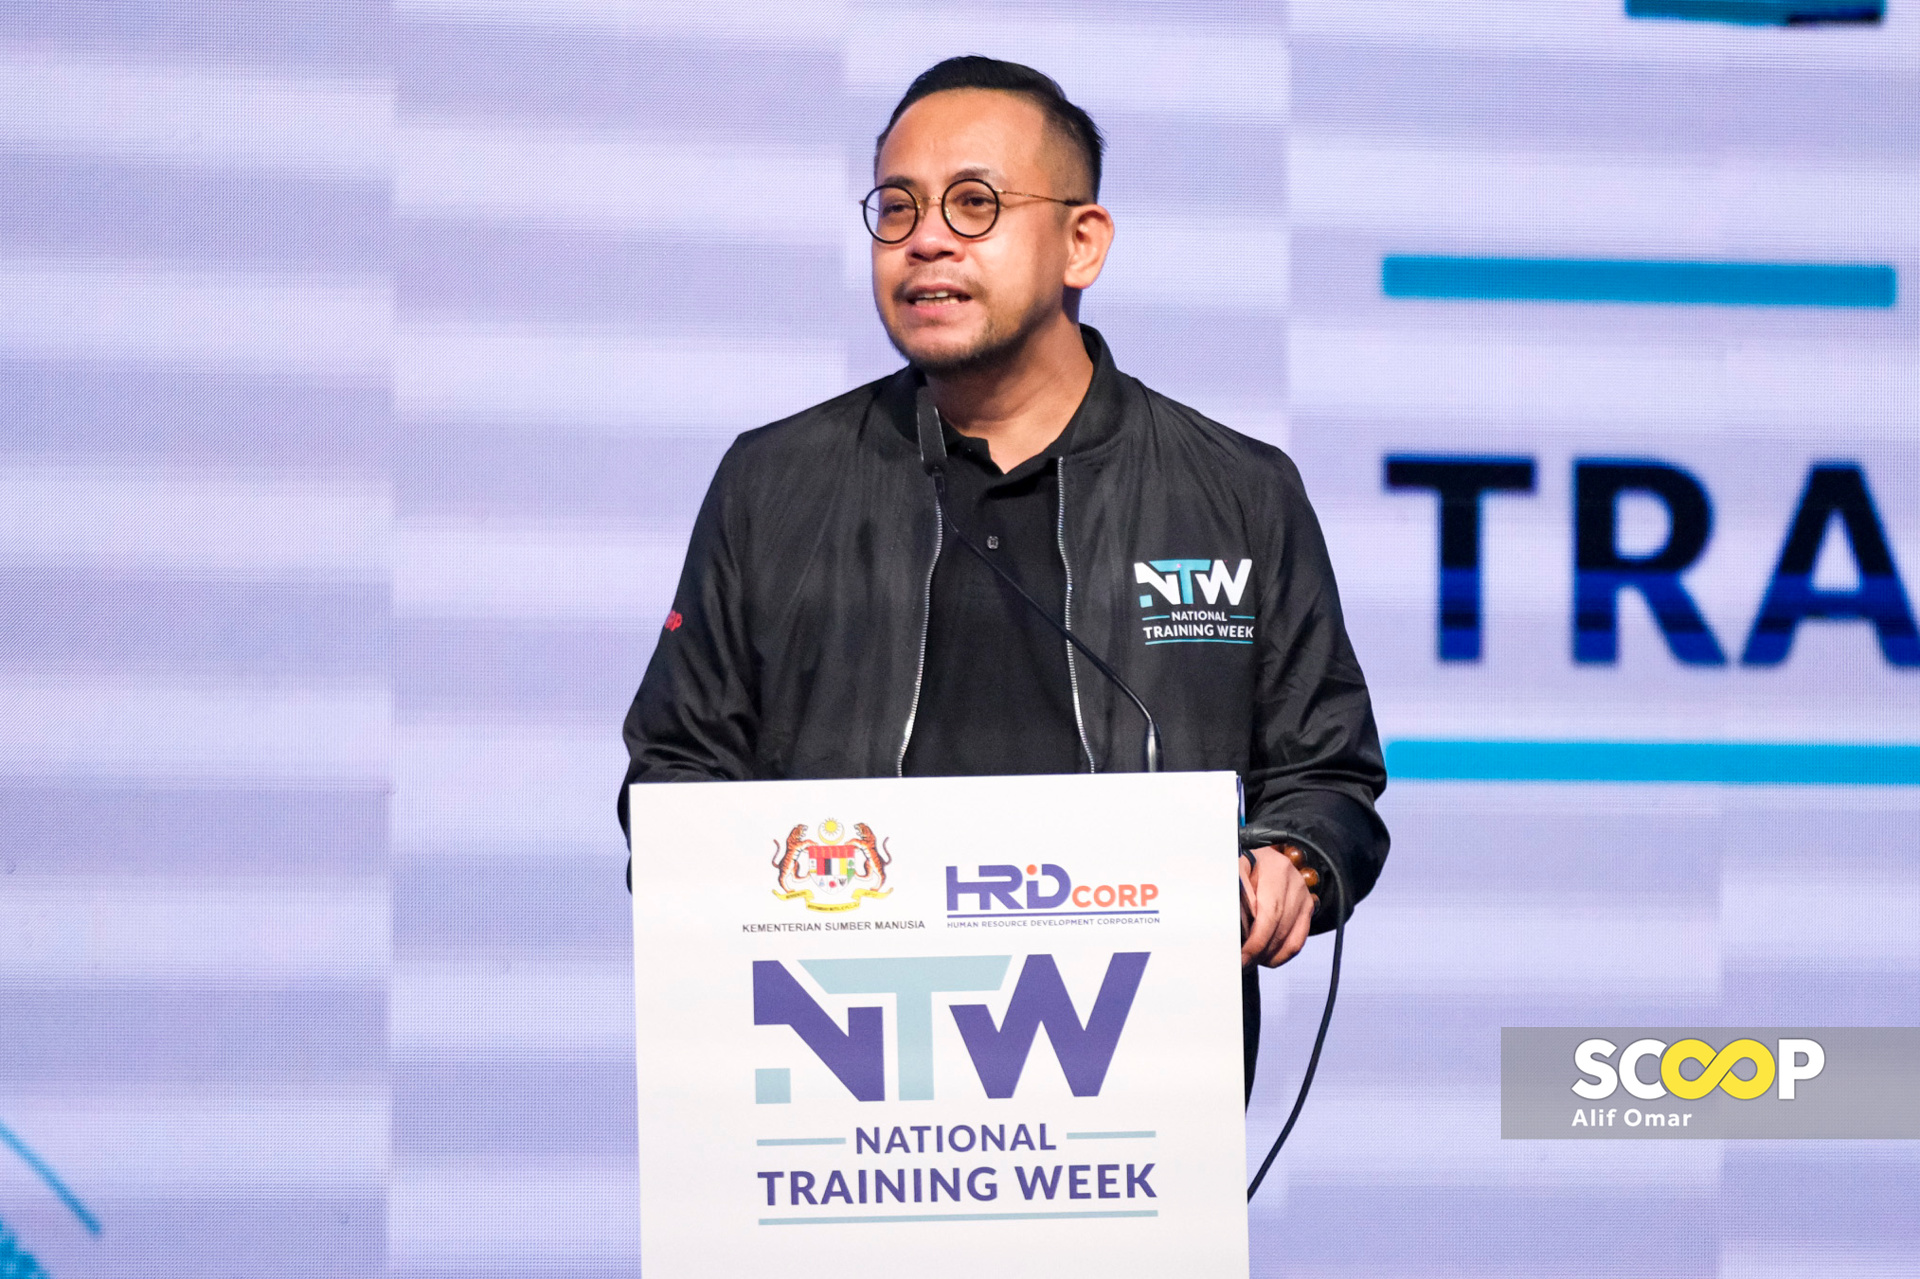 Malaysia’s skills training can reach global standards, says HR Minister